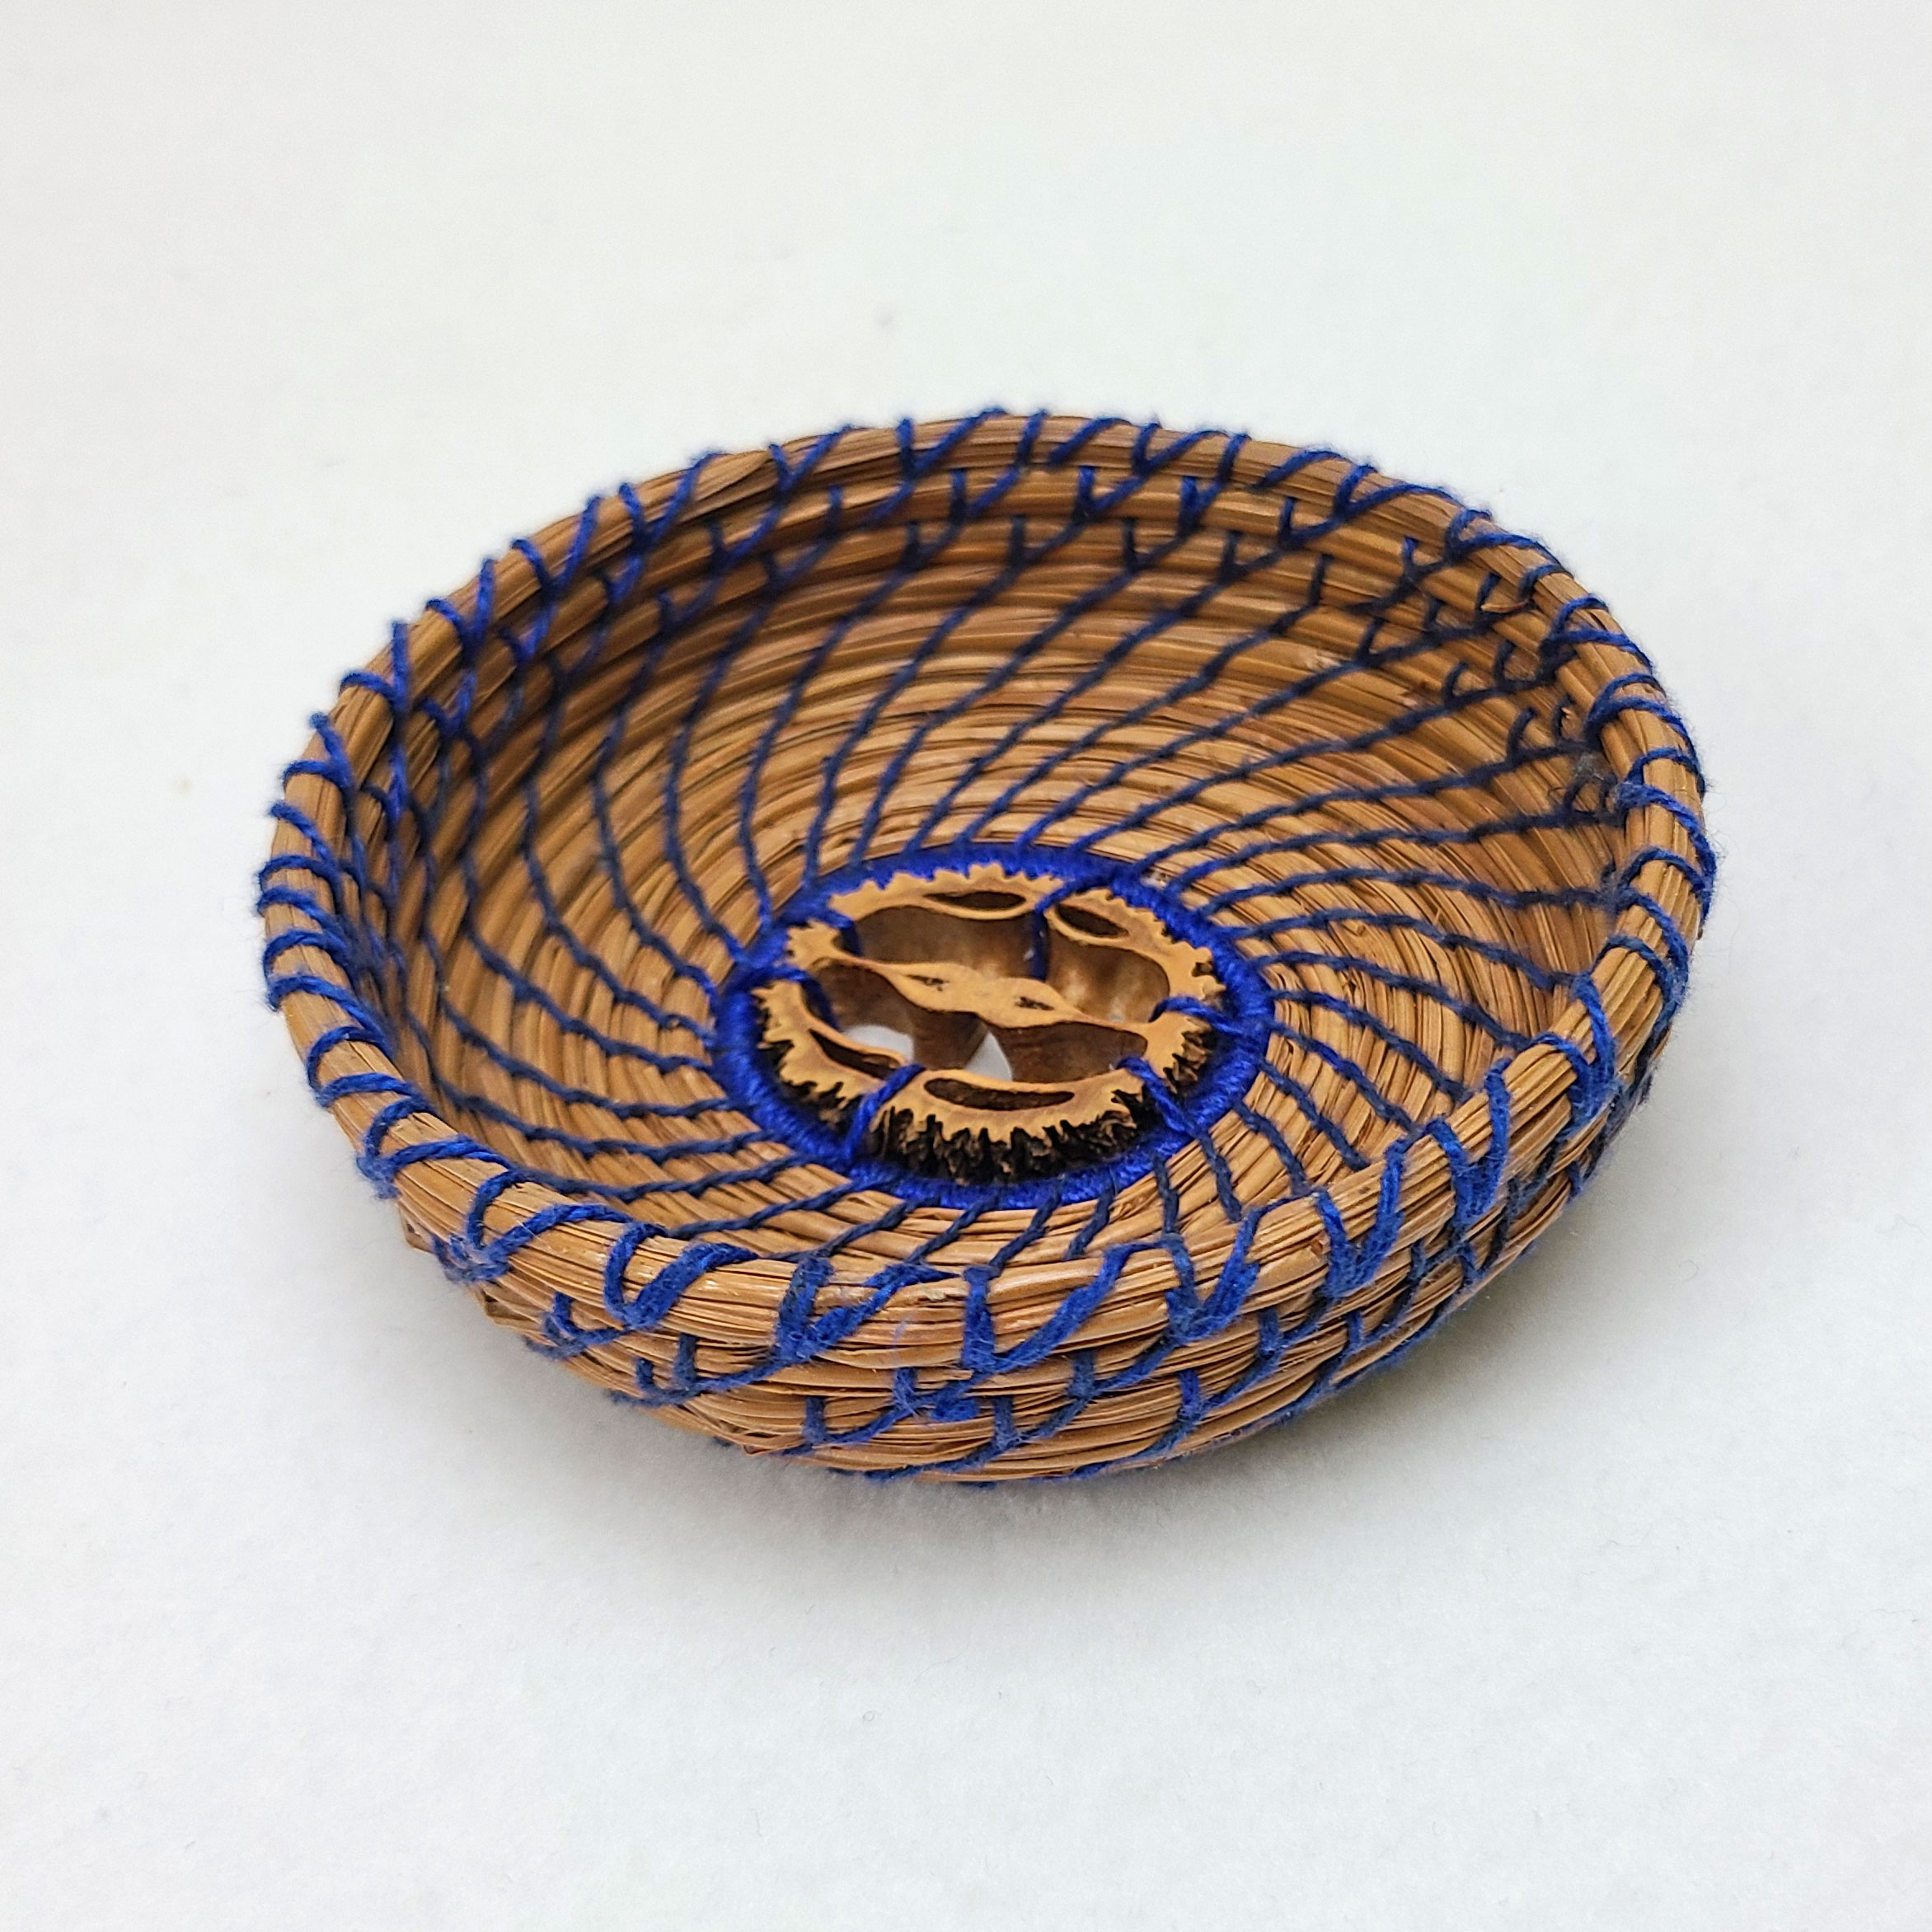 Pine Needle Basket Example by Peggy Thrasher